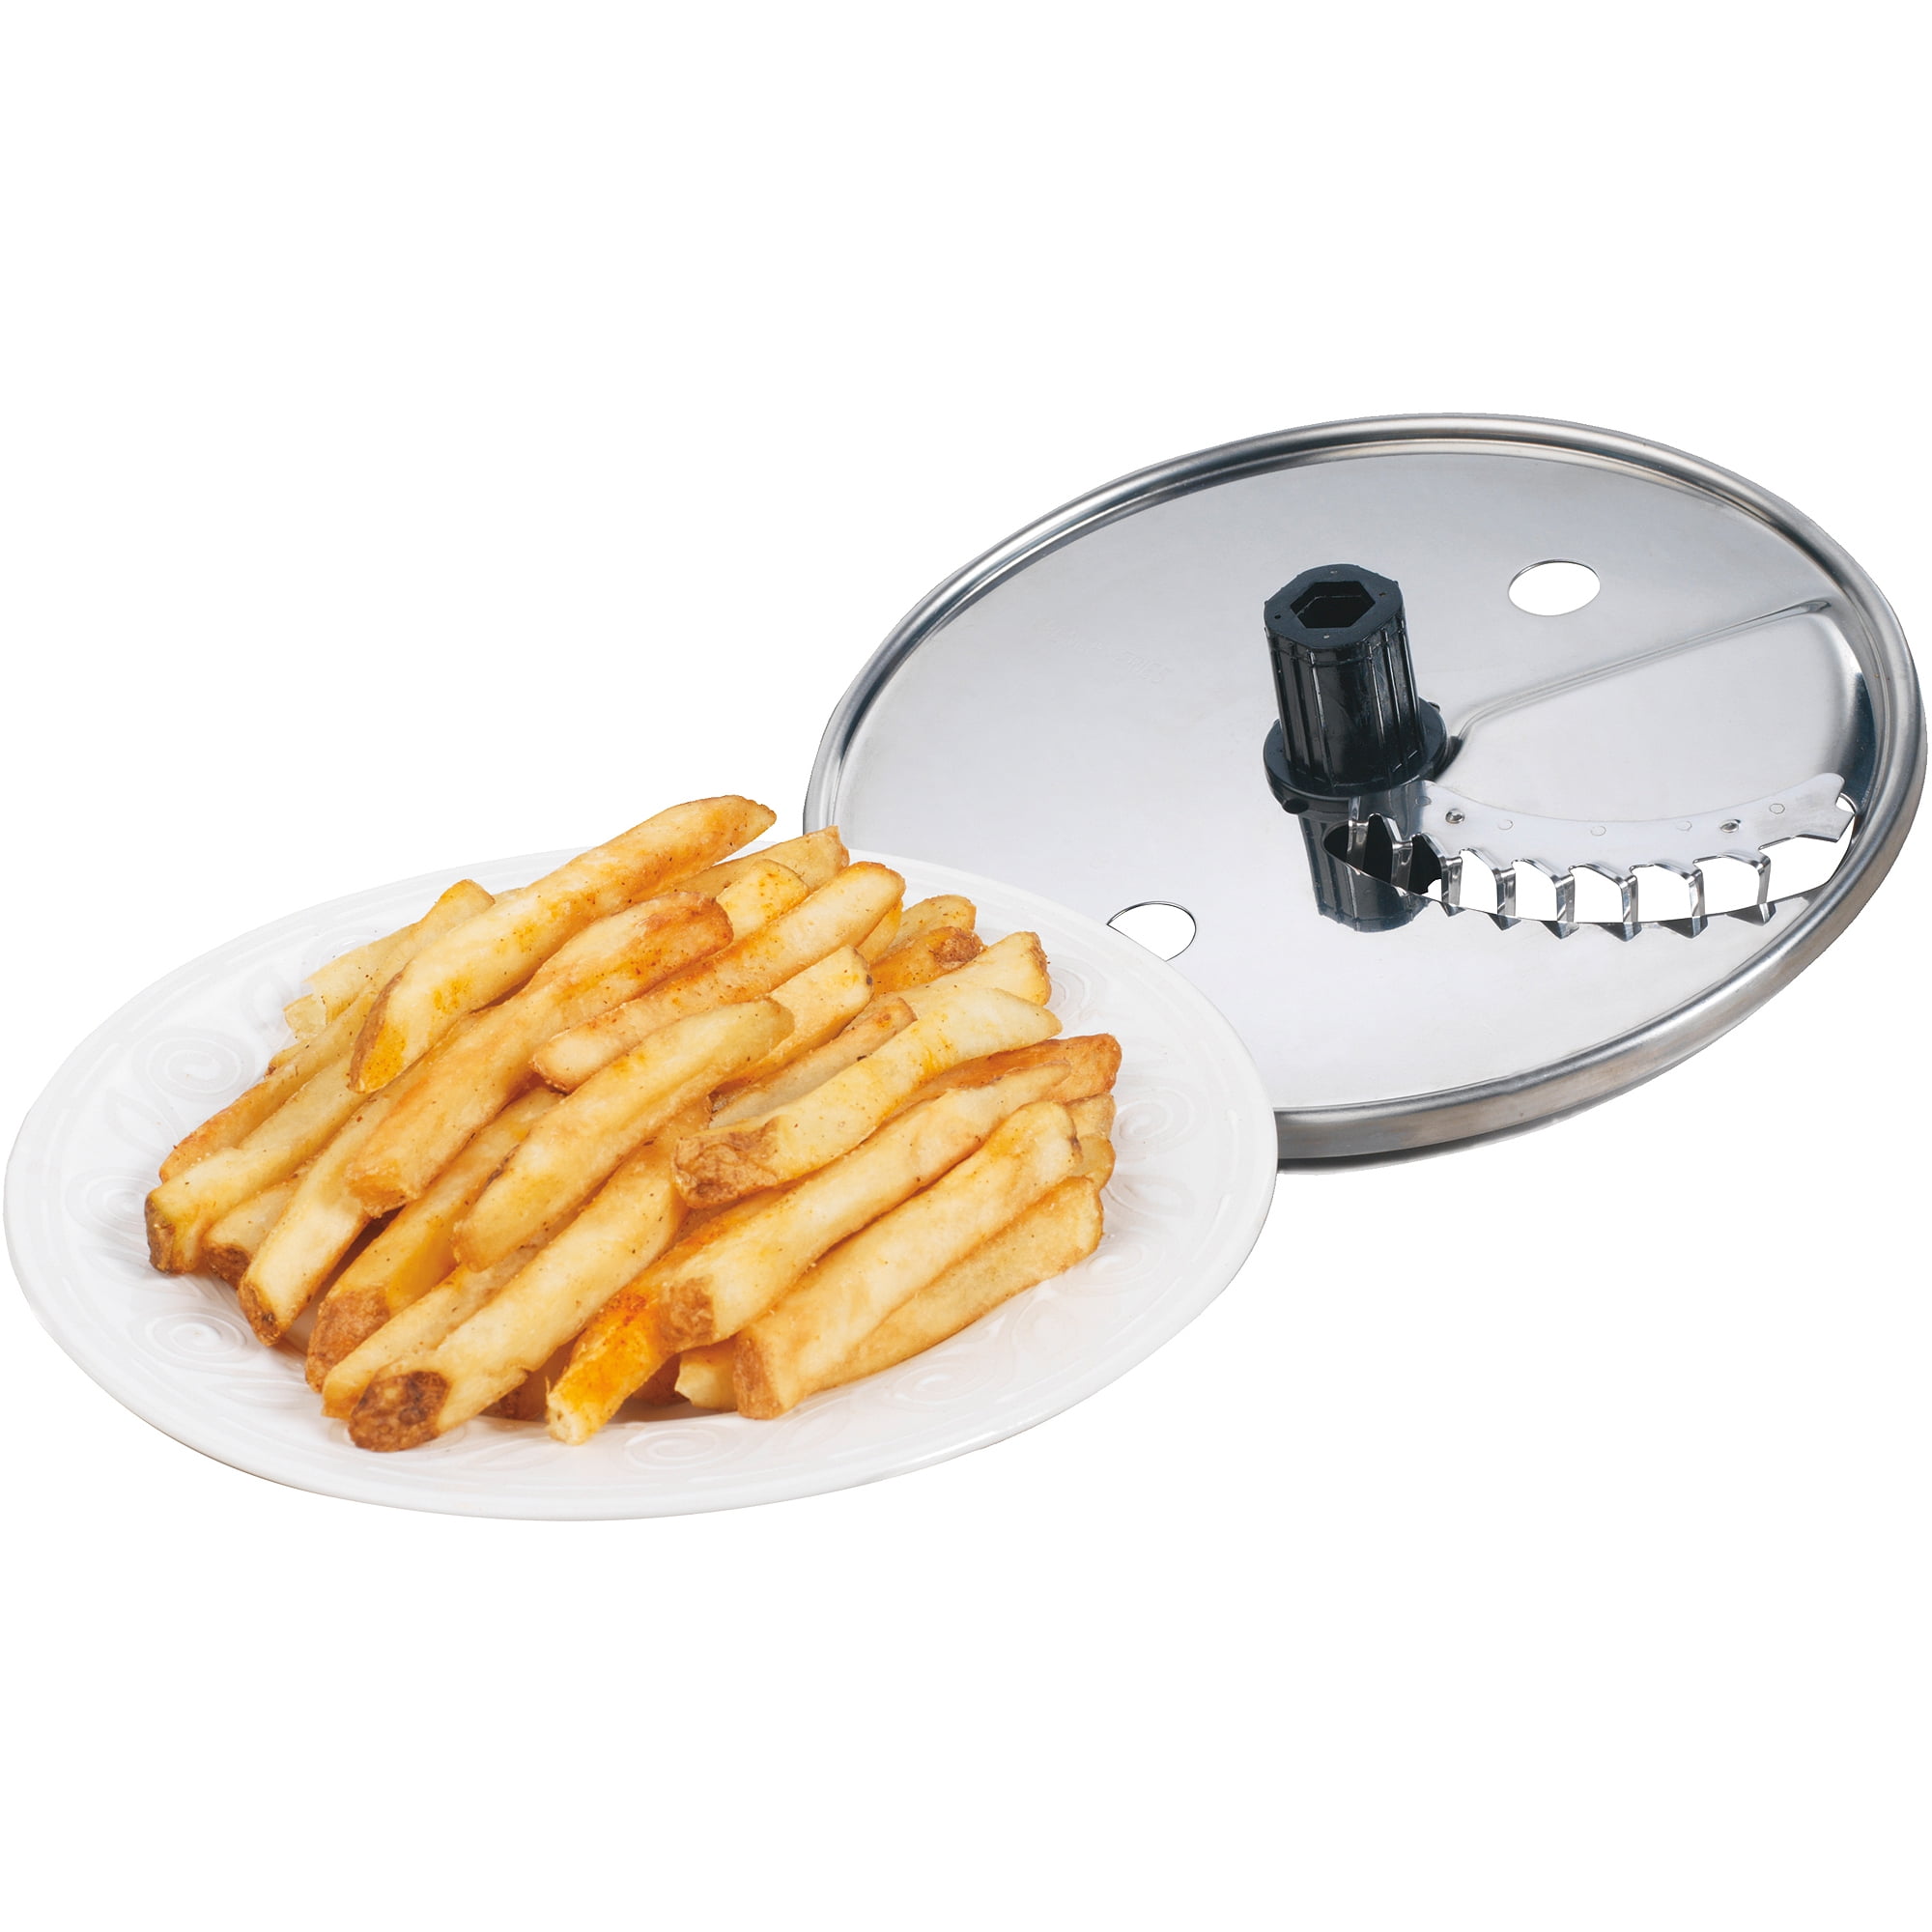 Ultimate Disco Fries with Hamilton Beach Air Fryer - Ever After in the Woods